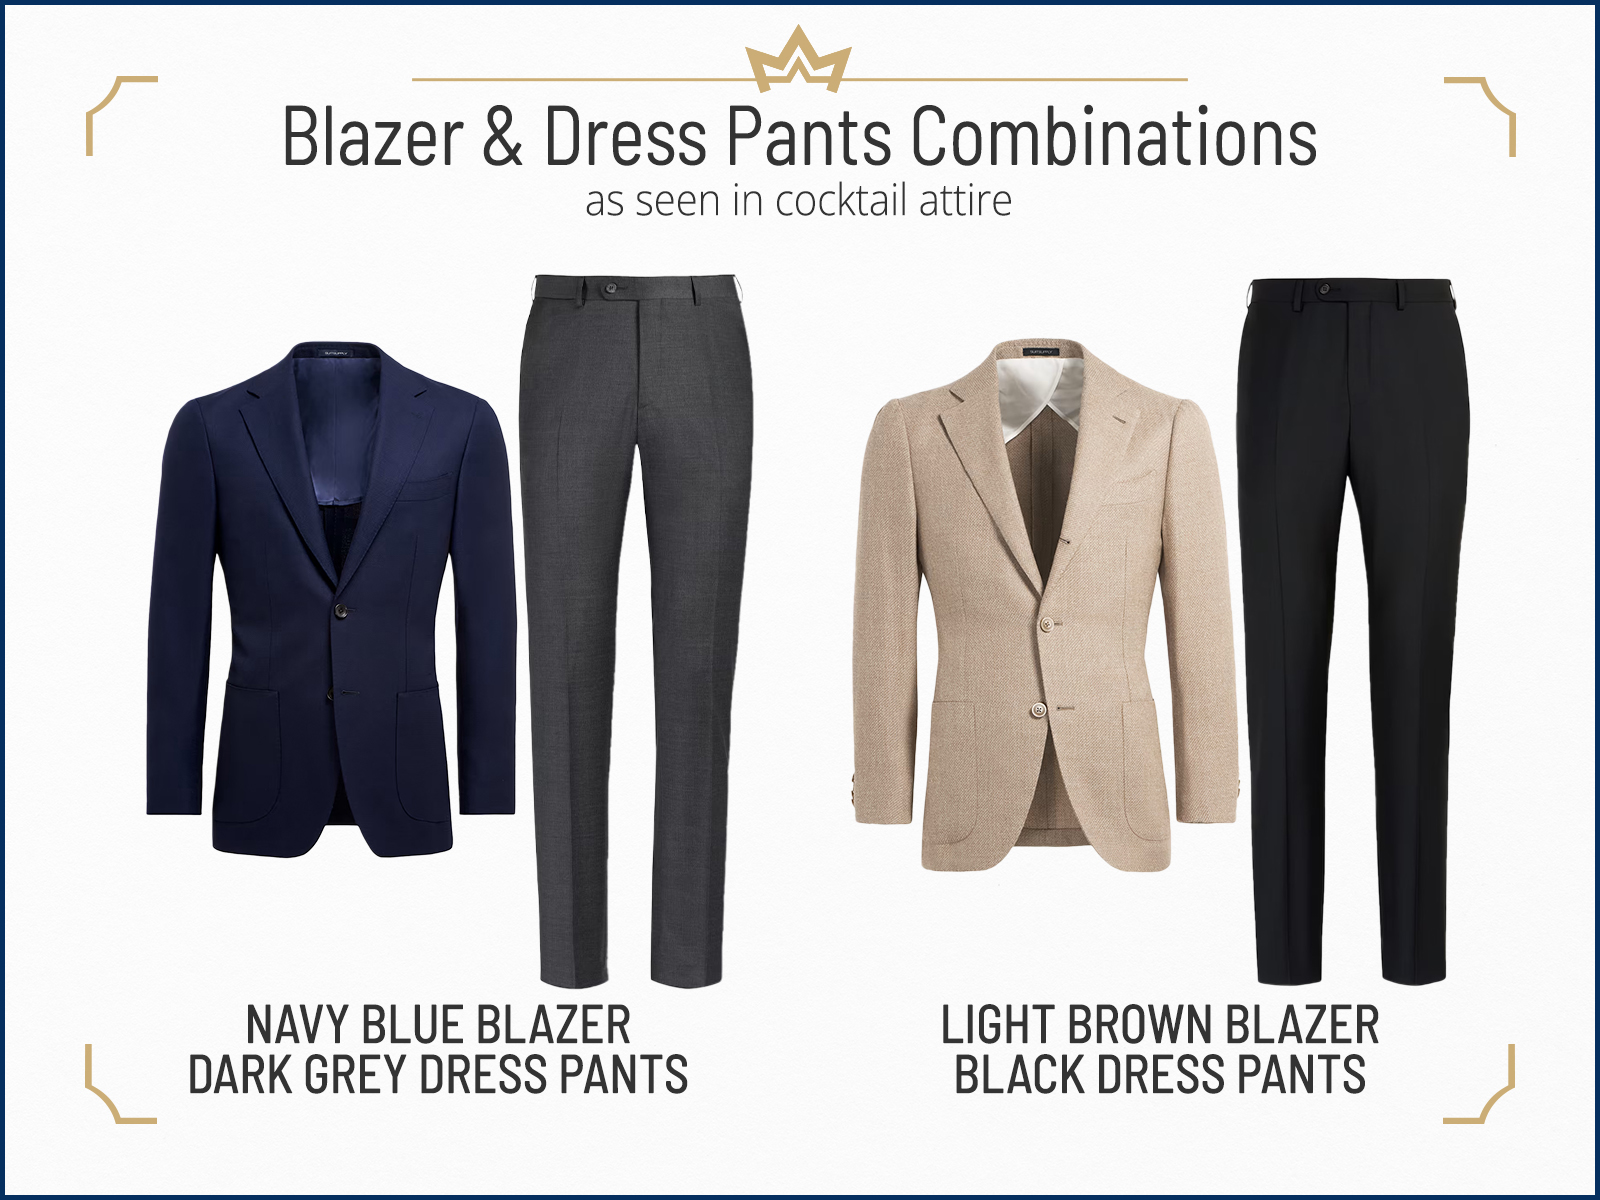 Blazer and dress pants cocktail attire combinations